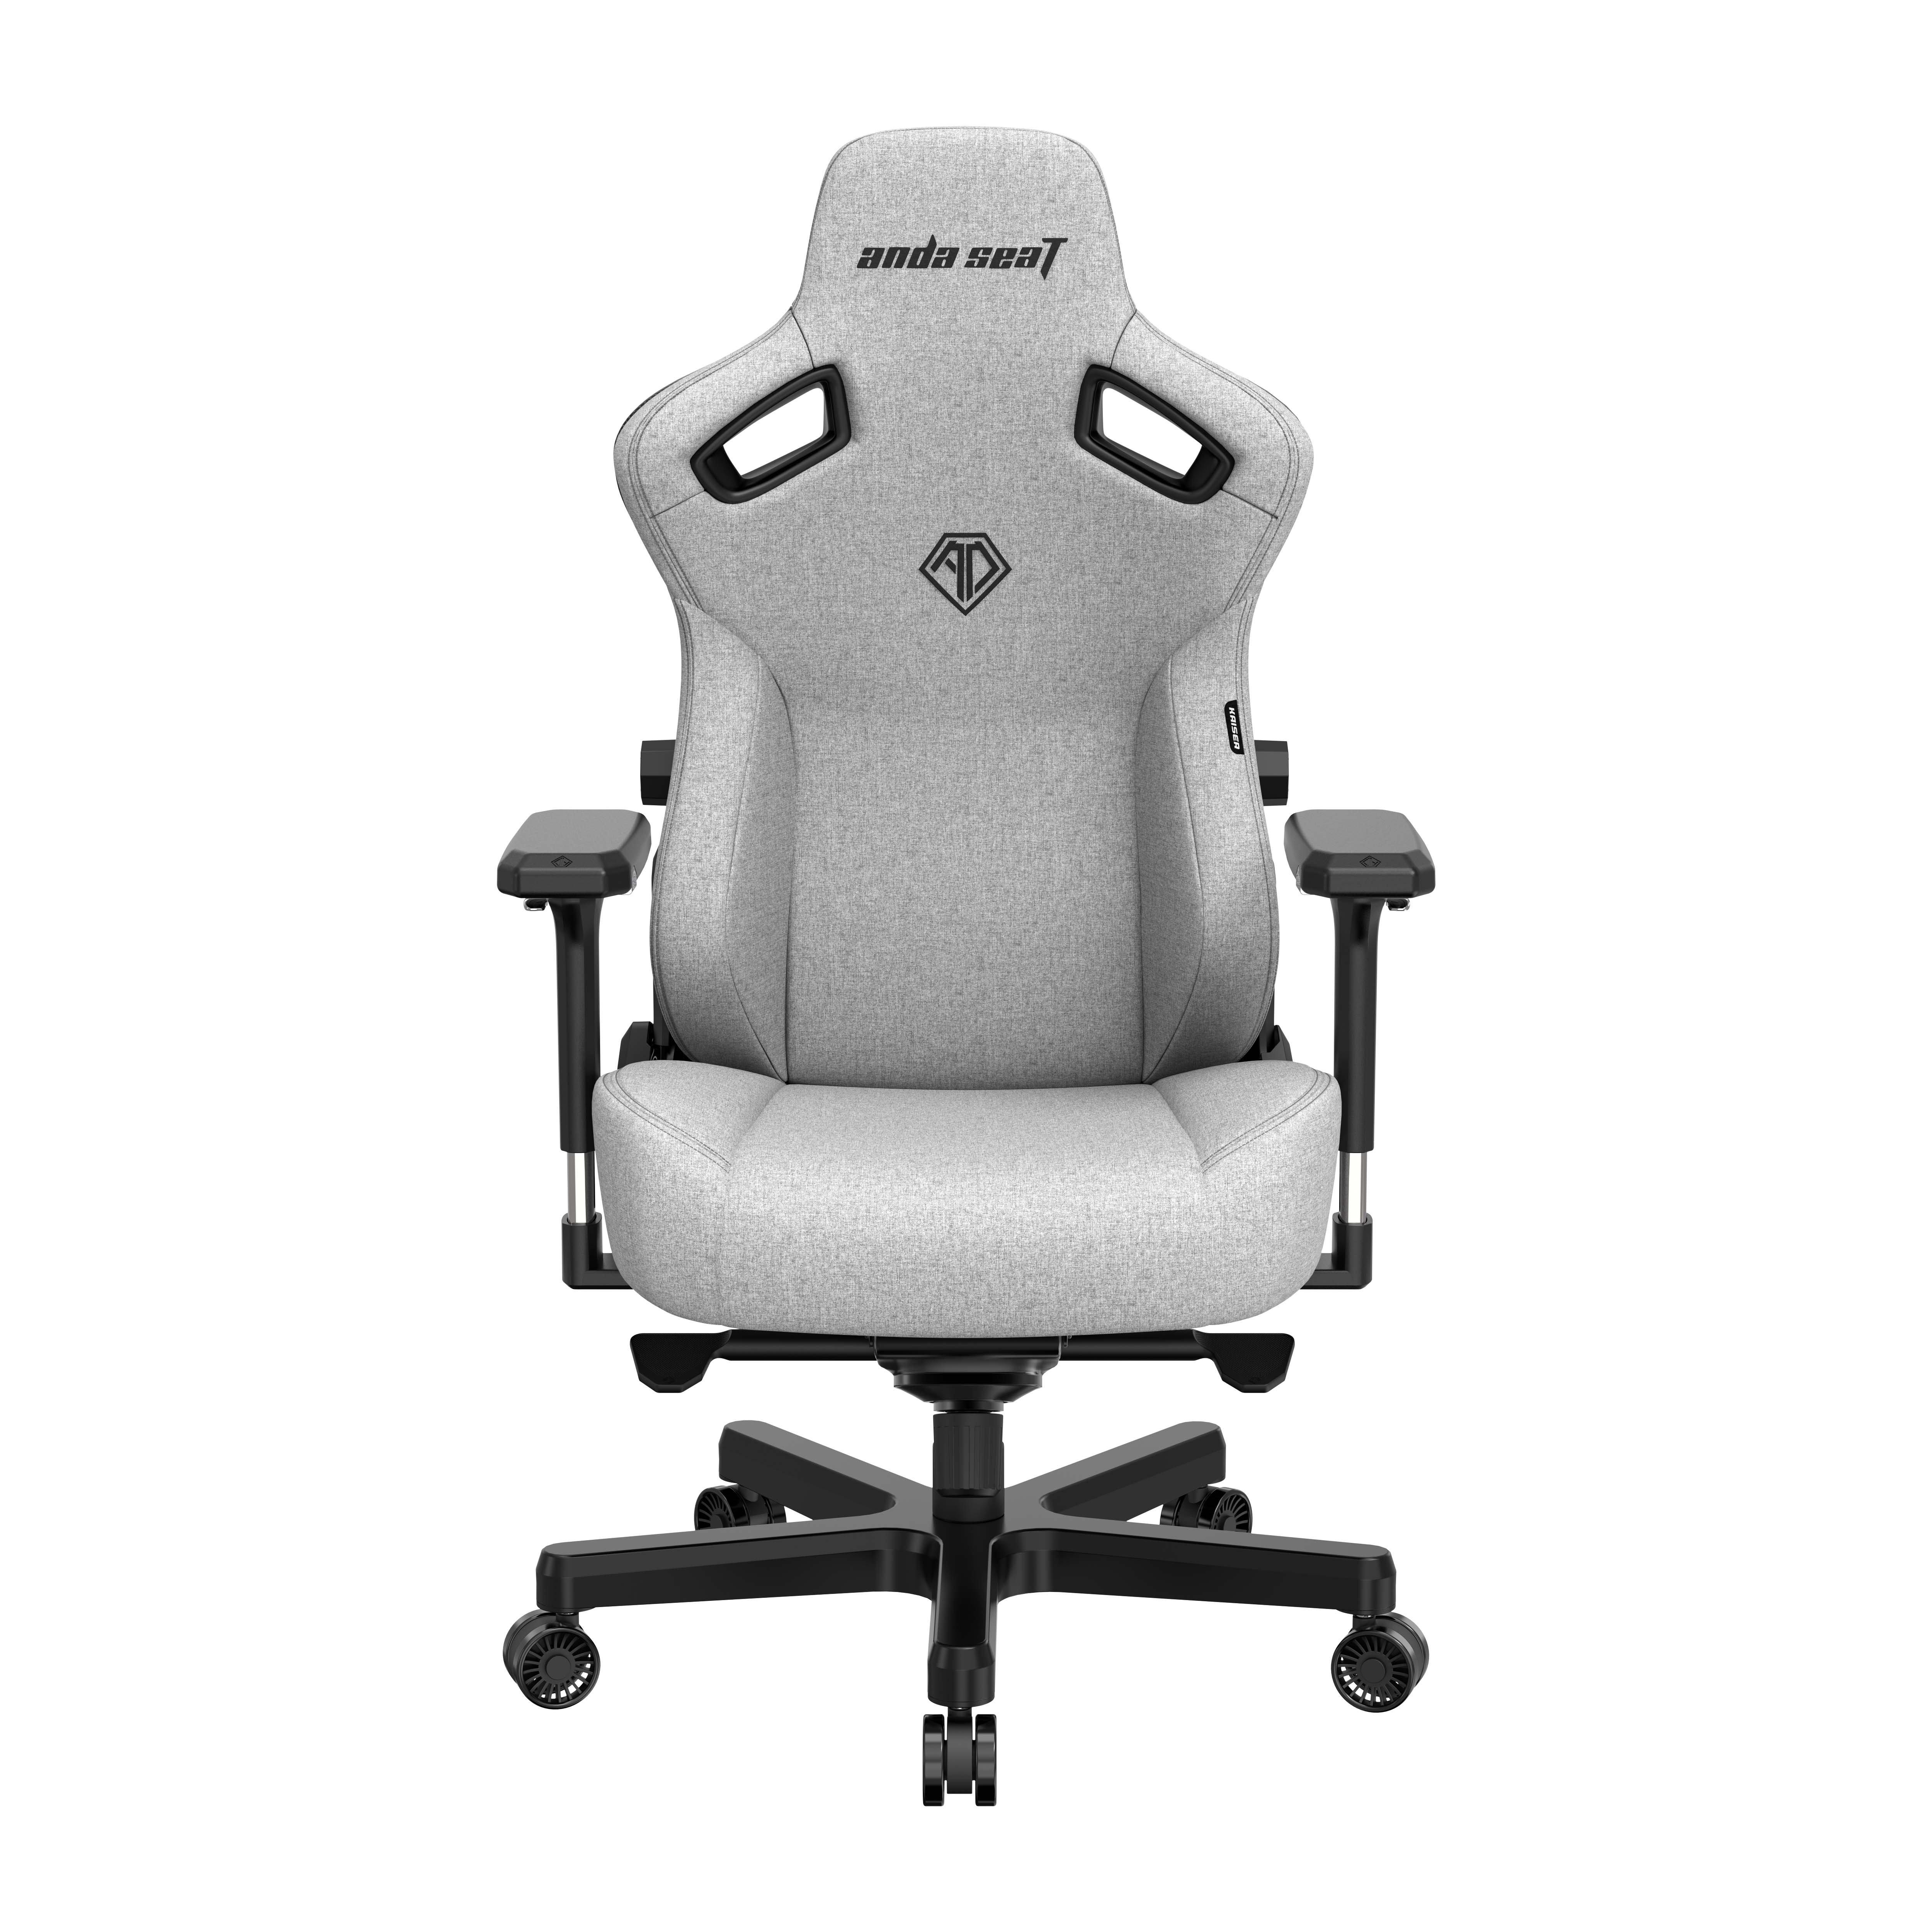 AndaSeat Kaiser 3 L Gaming Chair - Gray Fabric